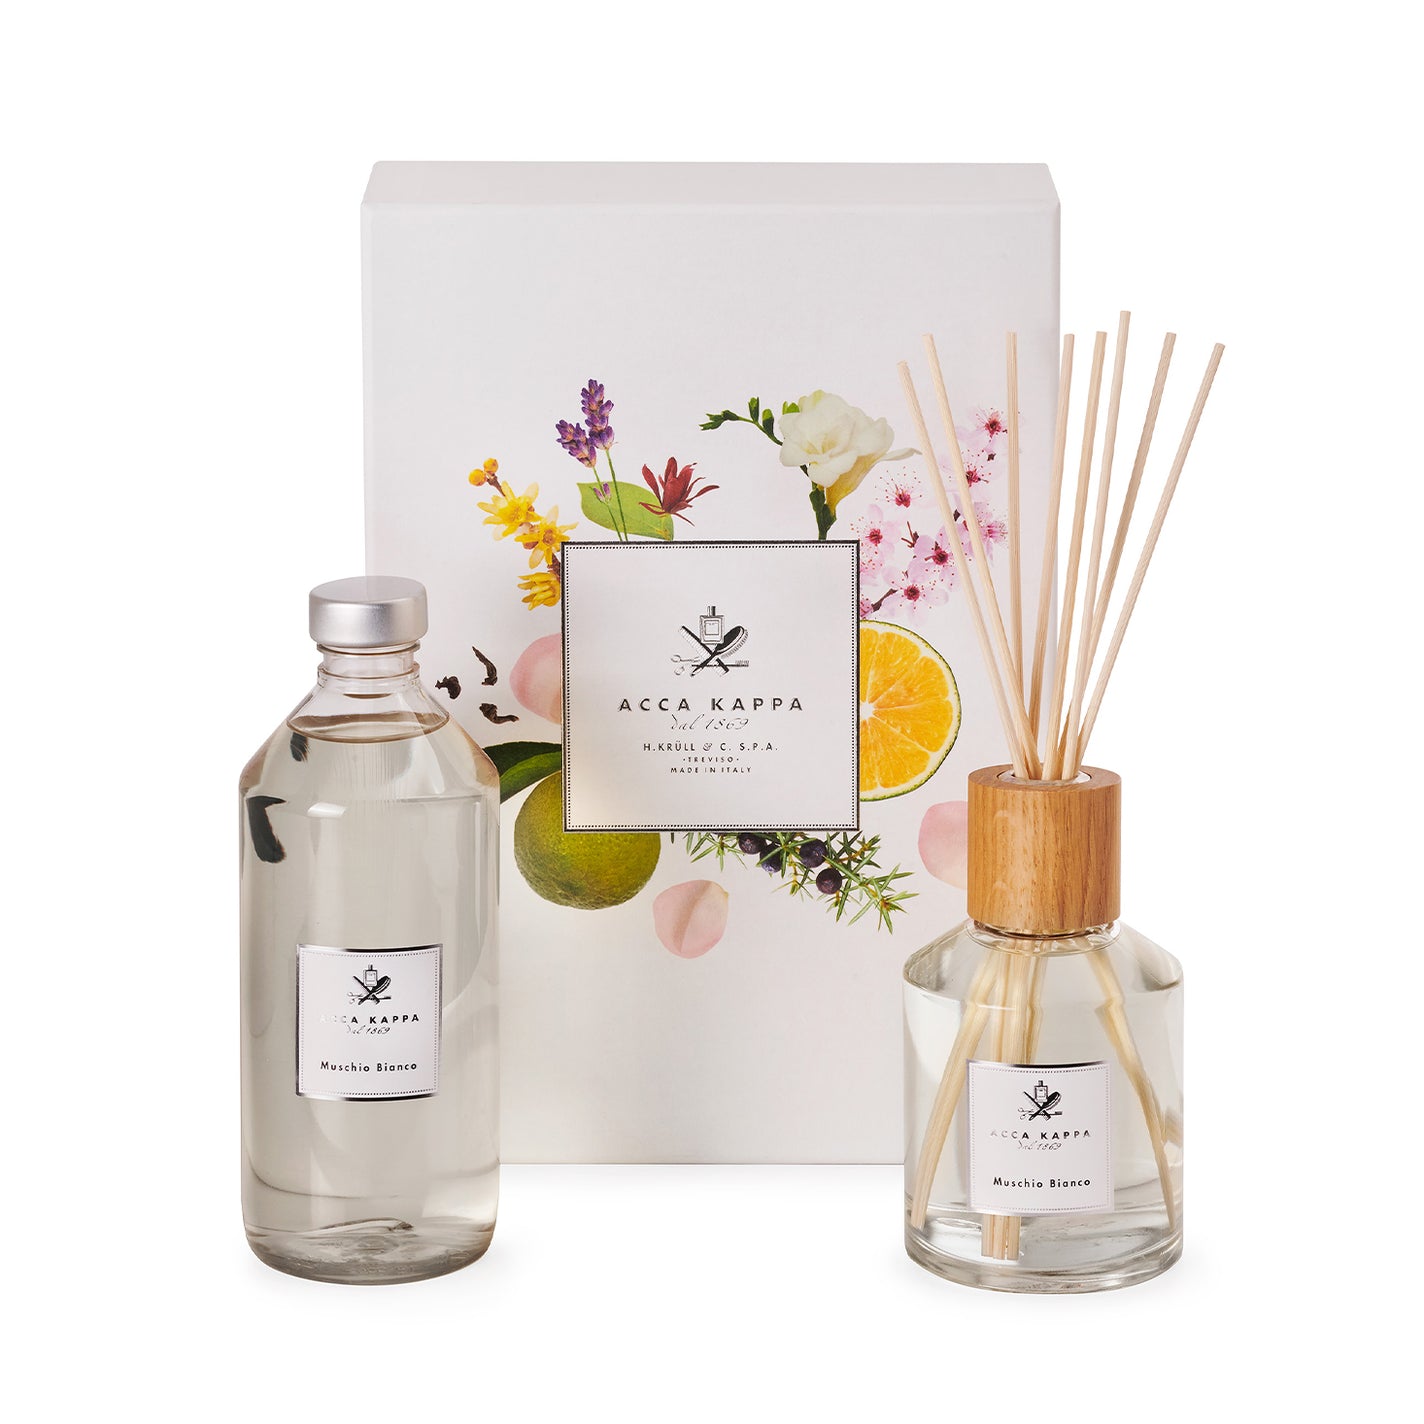 Acca Kappa White Moss Diffuser Gift Set - Value $188.00